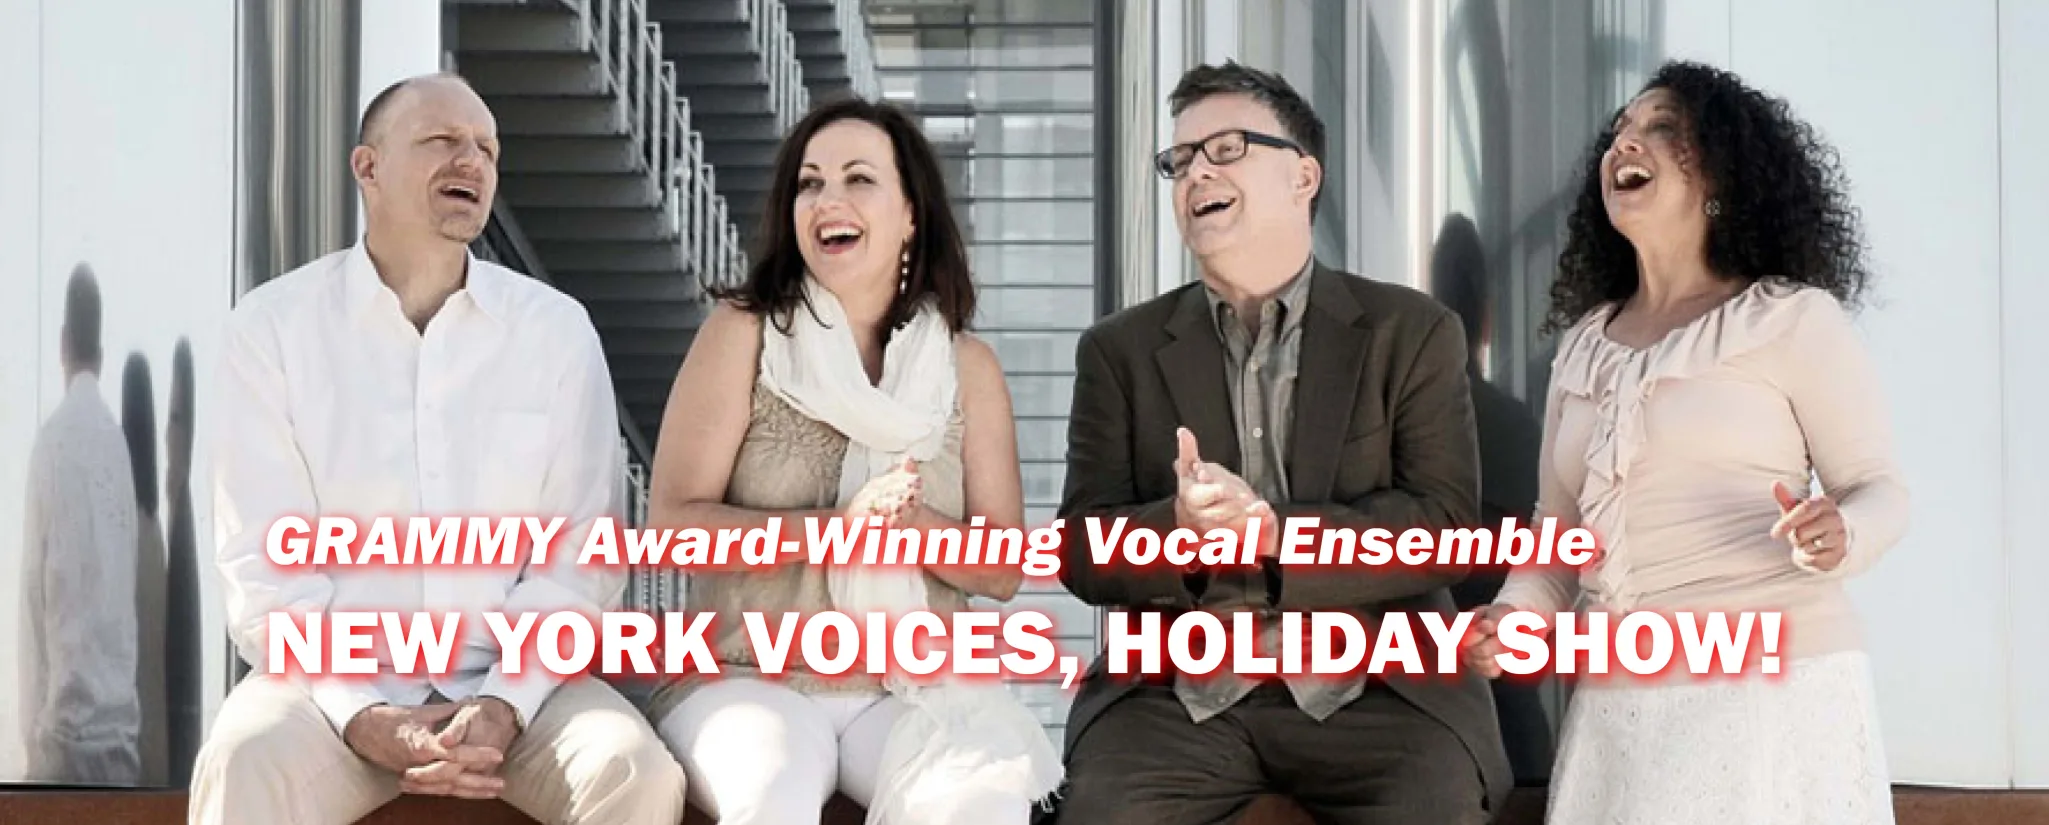 Celebrate Christmas with New York Voices